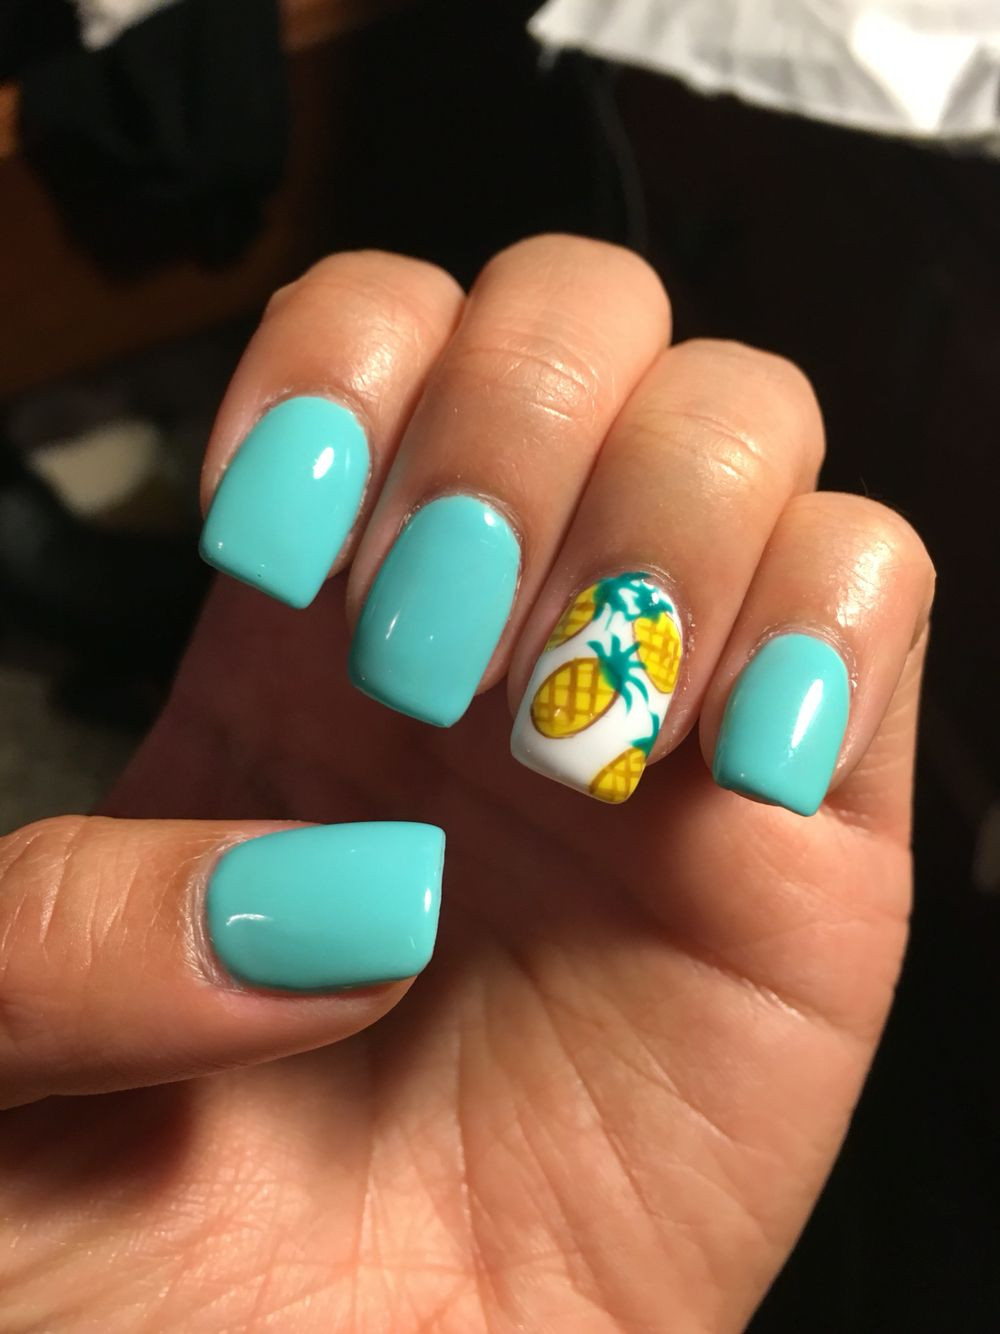 Acrylic Nail Ideas For Summer
 Pin on My nails